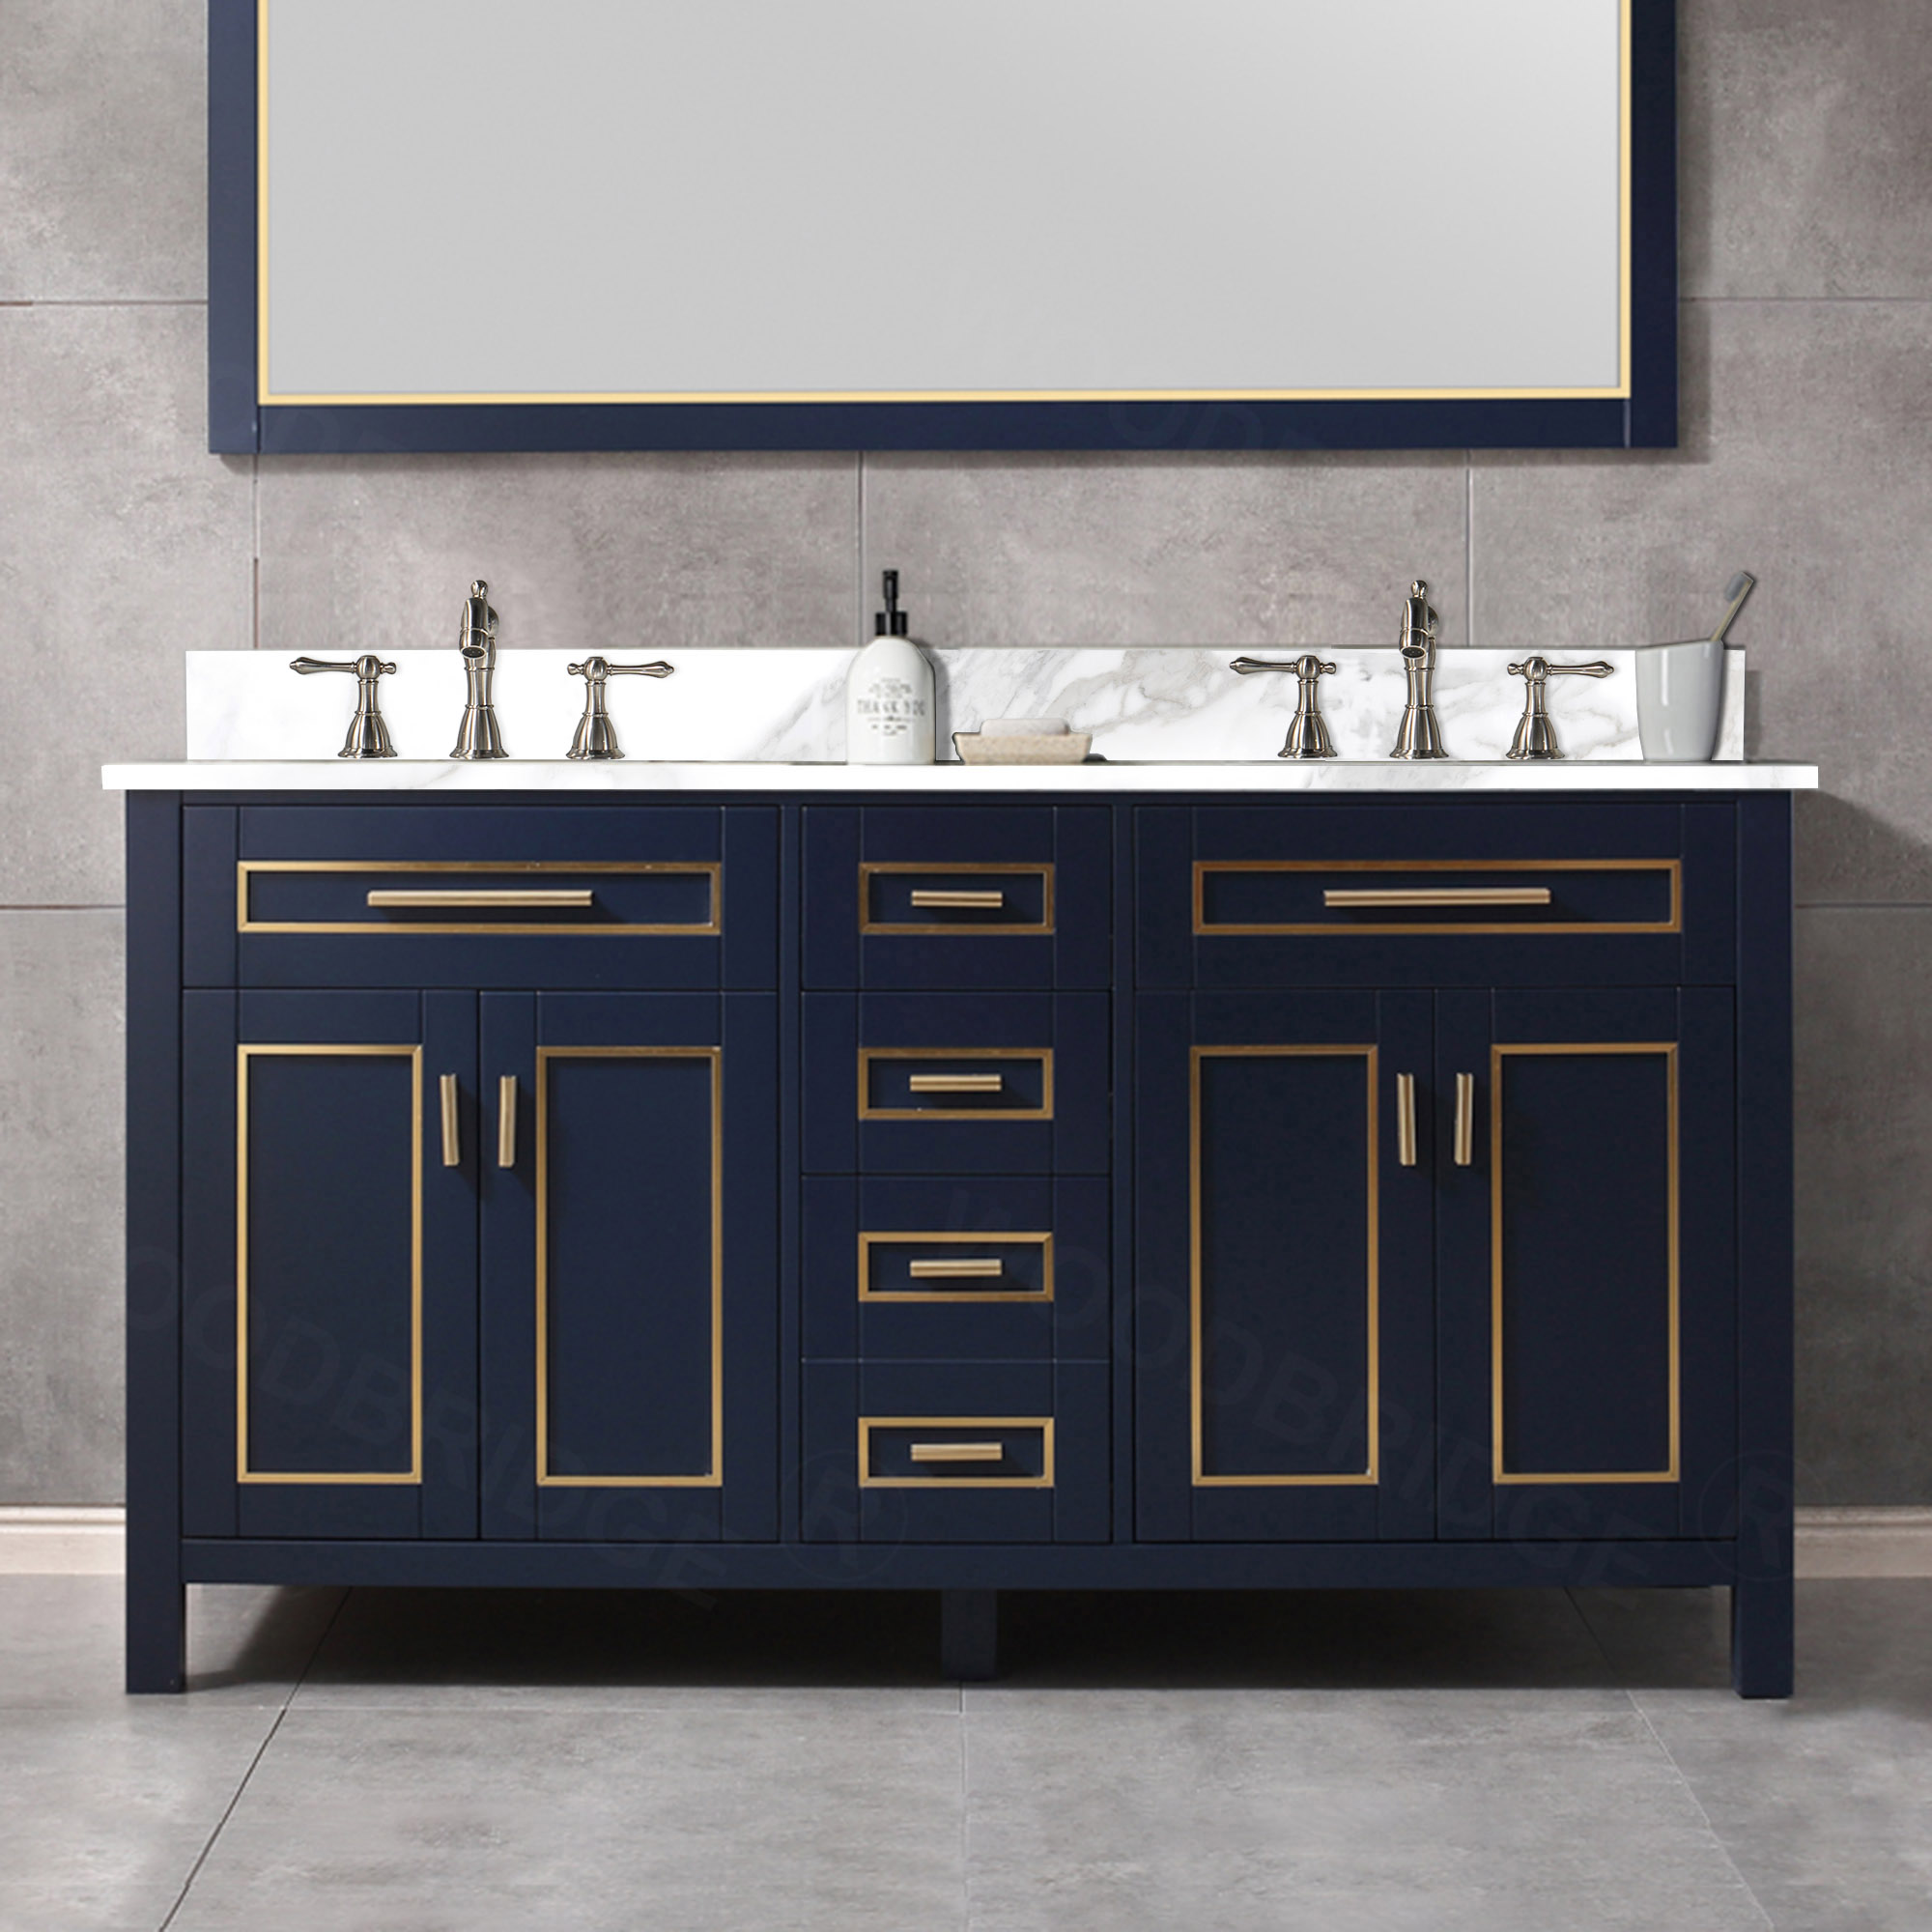 WOODBRIDGE Milan  61” Floor Mounted Single Basin Vanity Set with Solid Wood Cabinet in Navy Blue and Engineered stone composite Vanity Top in Fish Belly White with Pre-installed Undermount Rectangle Bathroom Sink and Pre-Drilled 3-Hole for 8” Widespread F